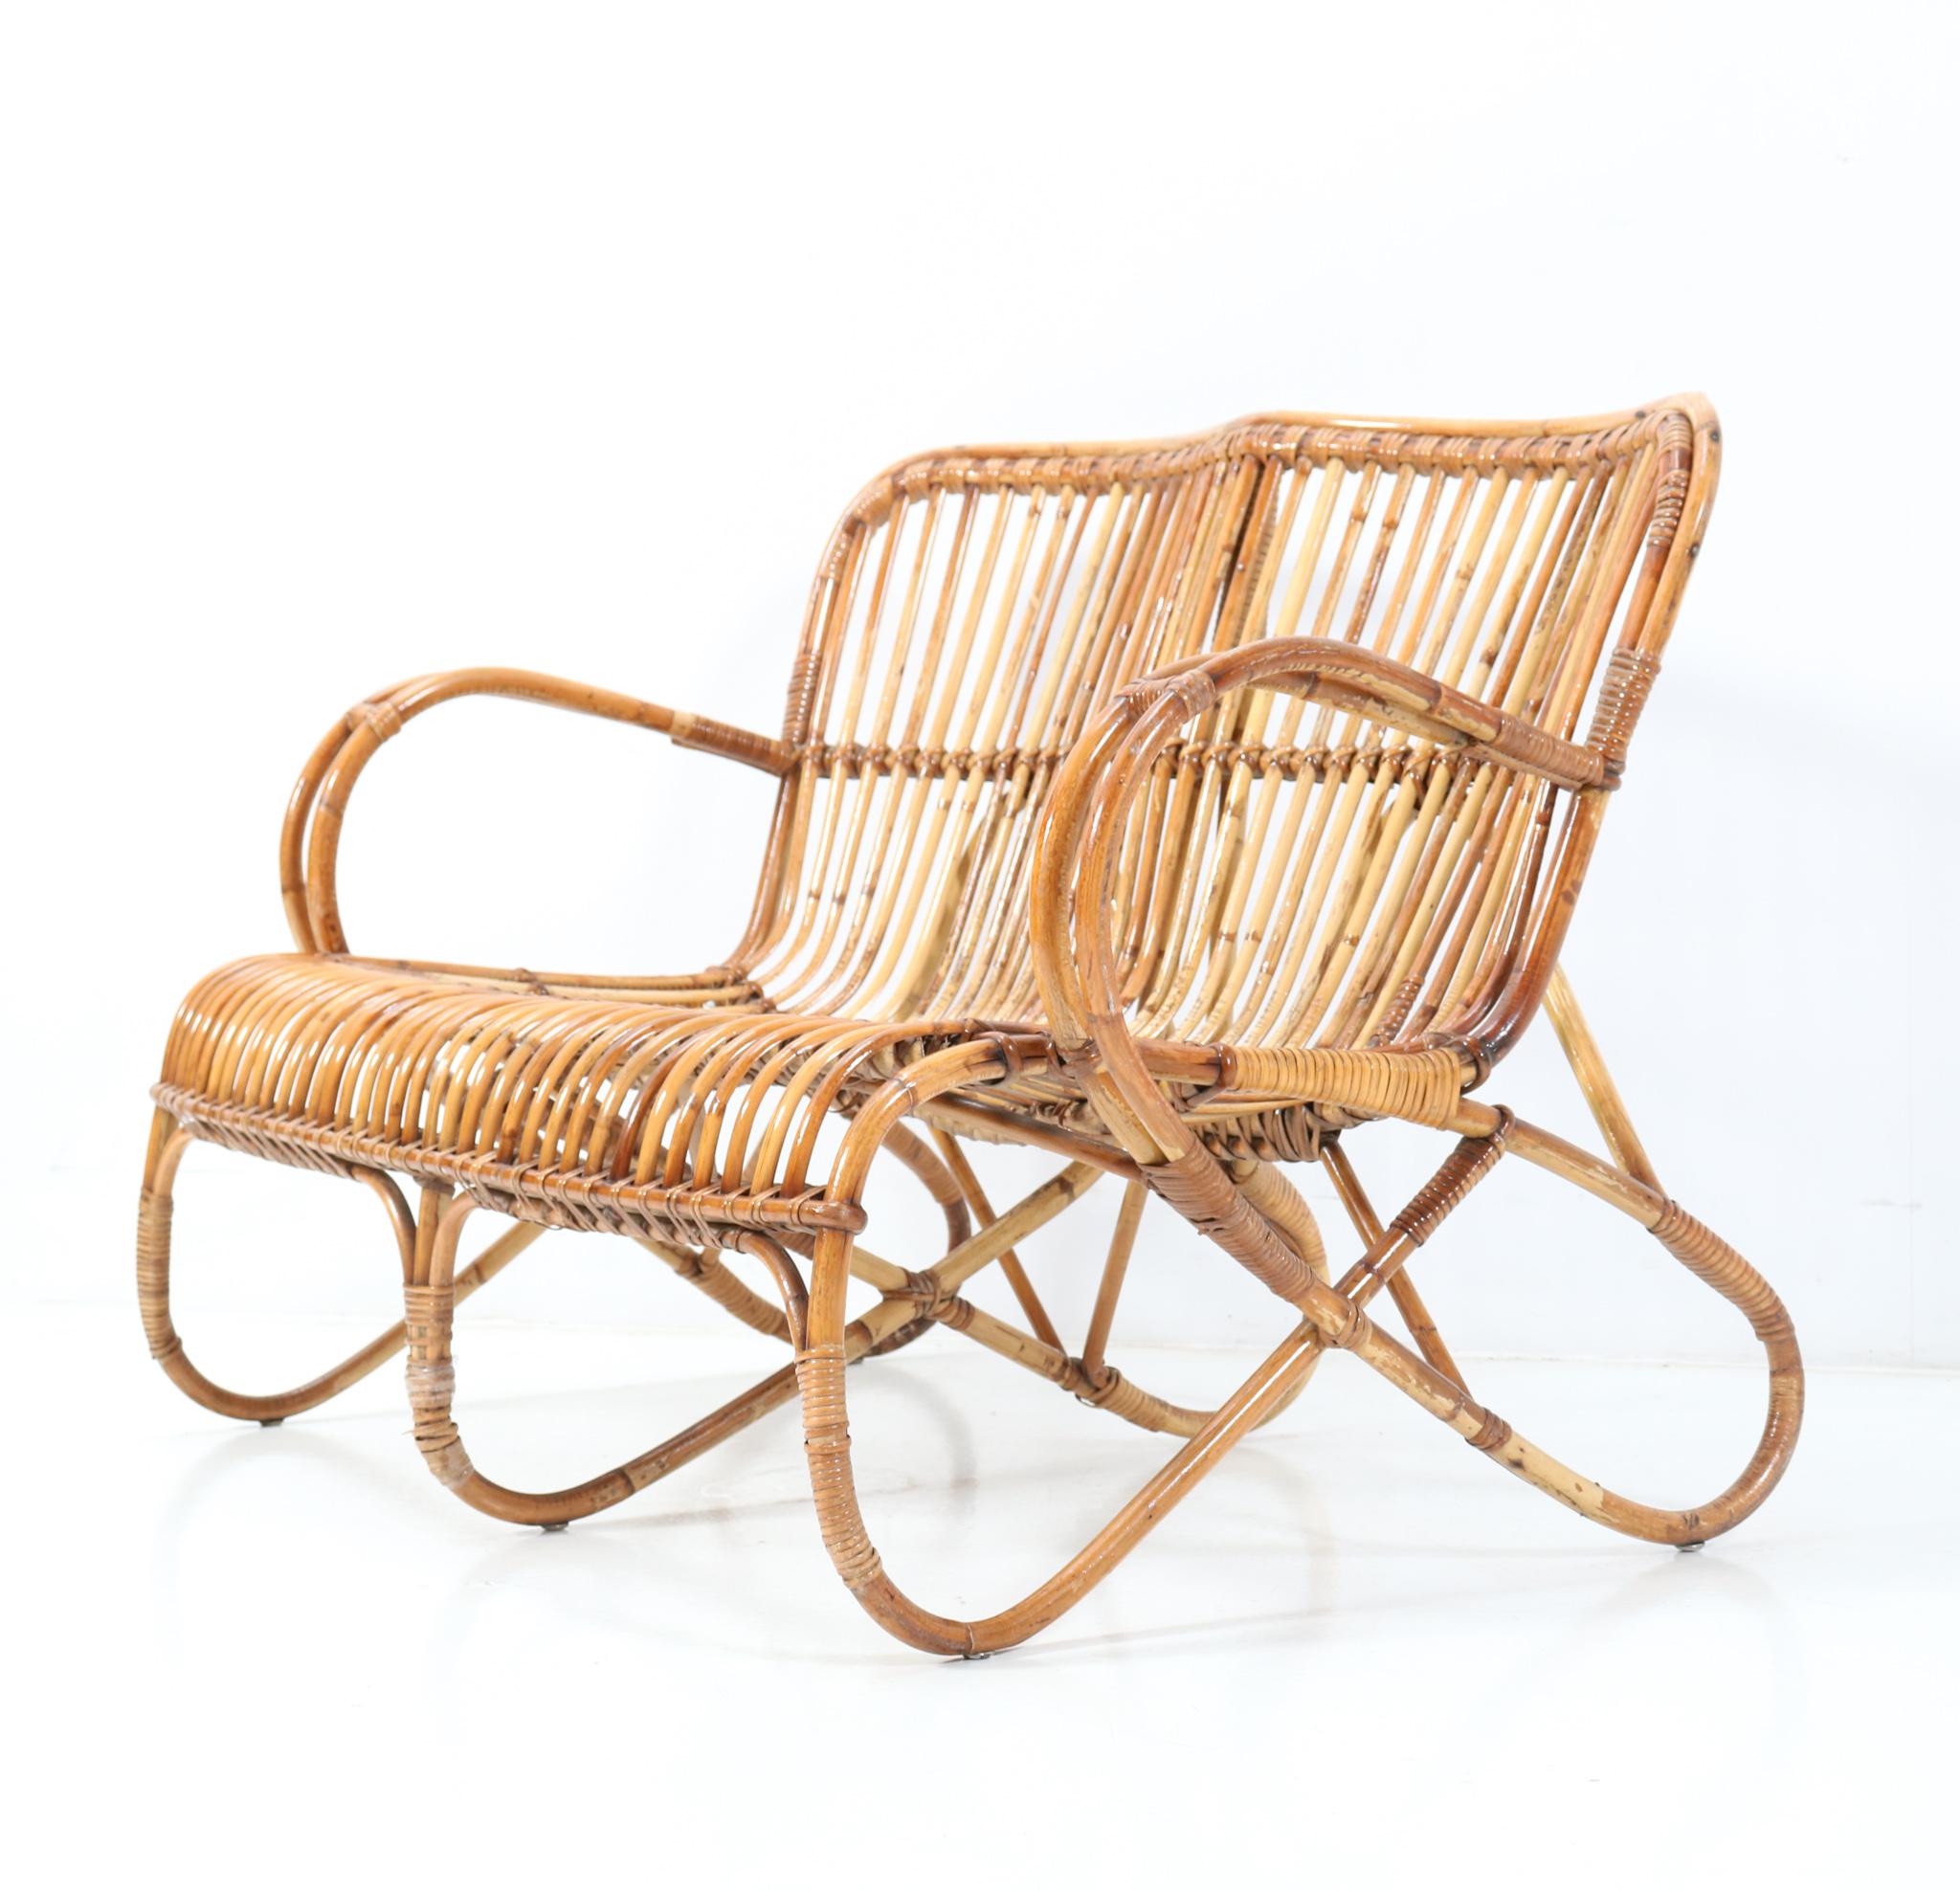 Mid-20th Century Vintage Mid-Century Modern Rattan and Bamboo Love Seat or Sofa by Rohe, 1960s